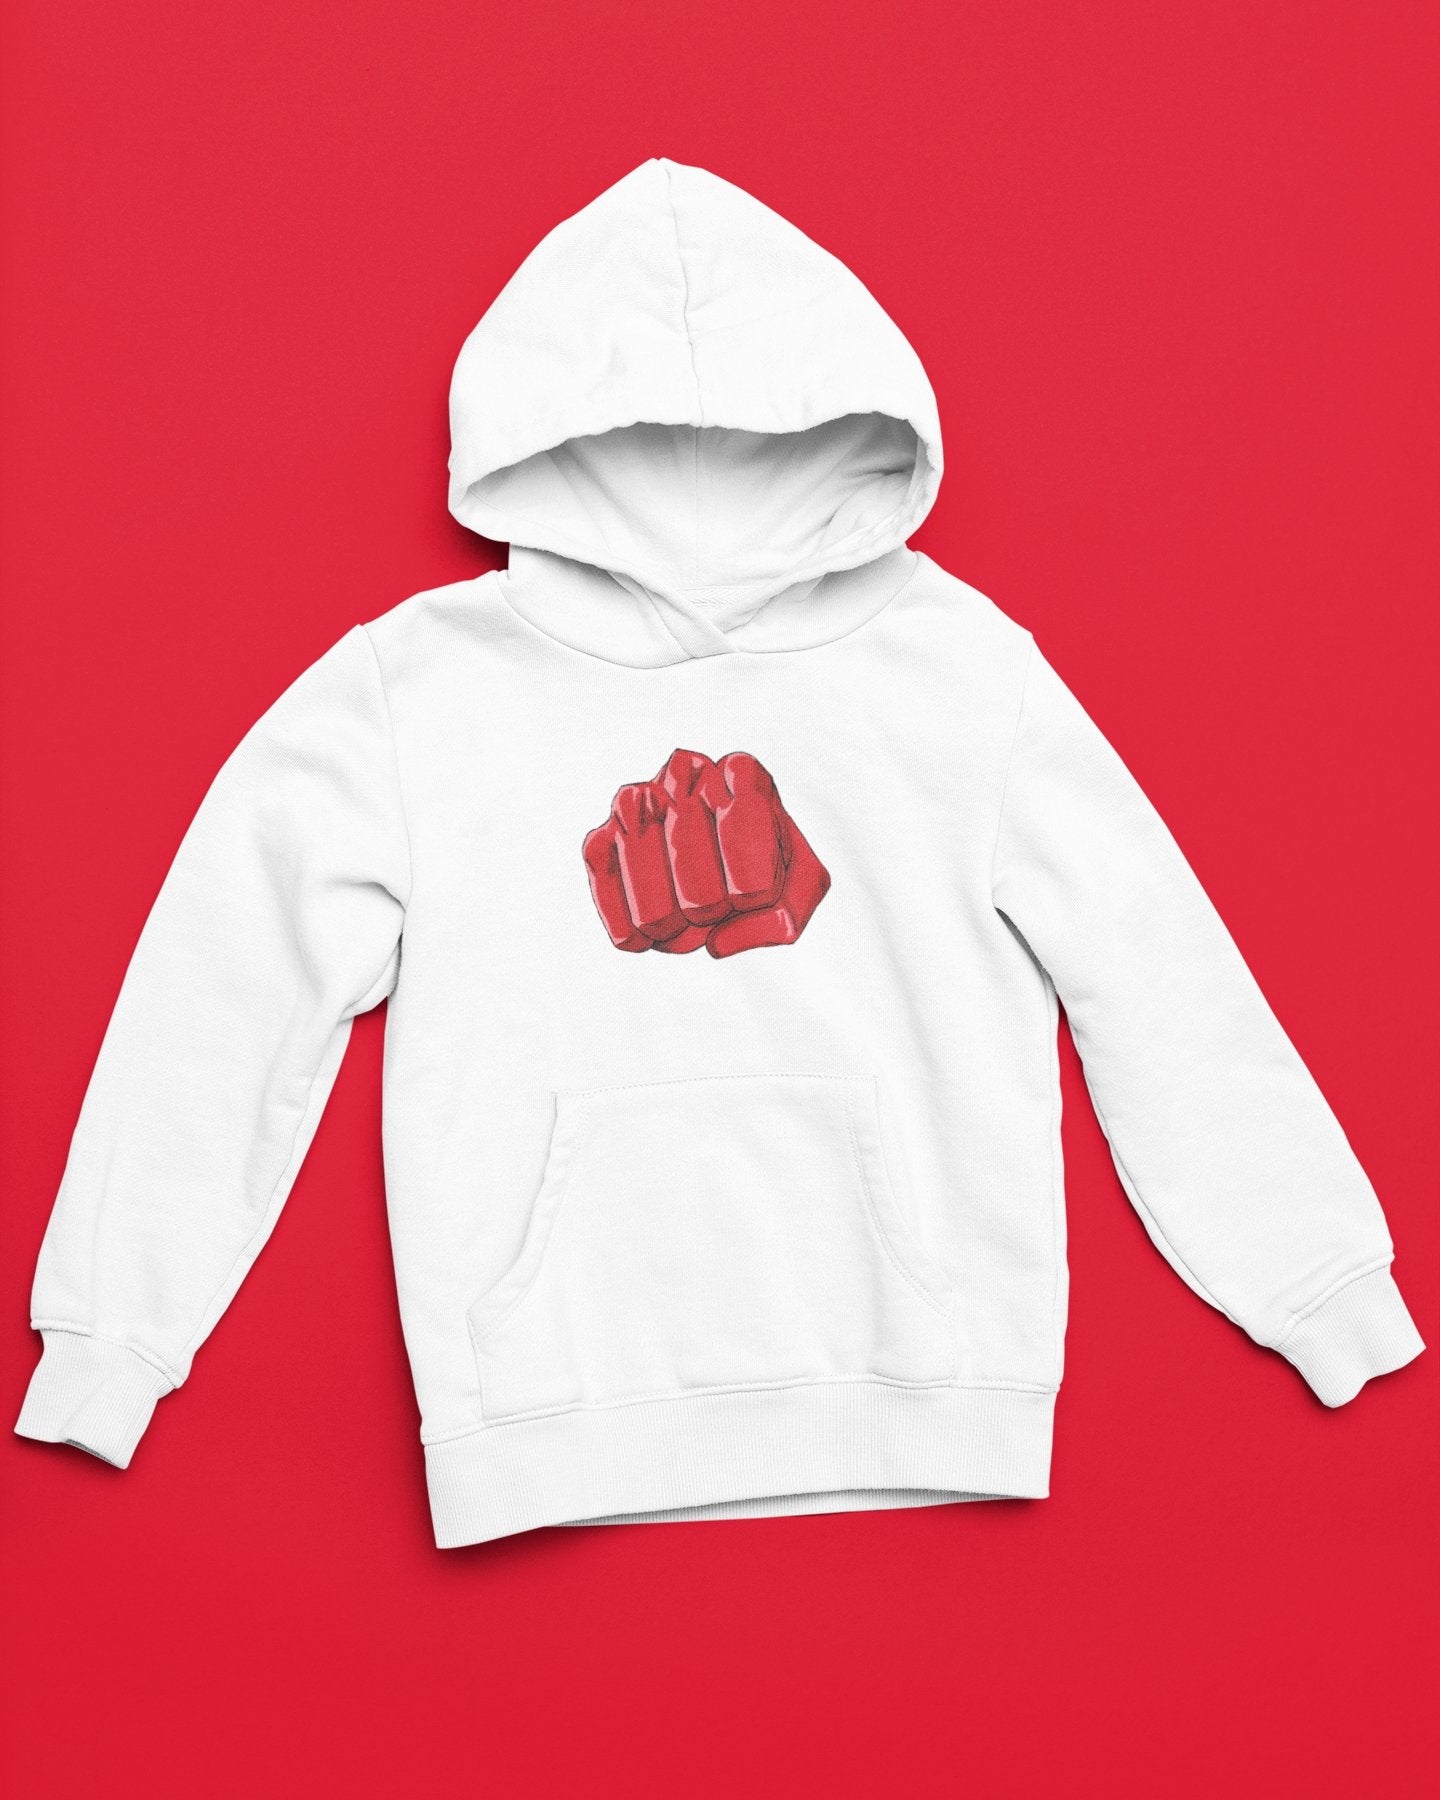 The One Punch One Punch Man Anime Hoodie - One Punch Fits